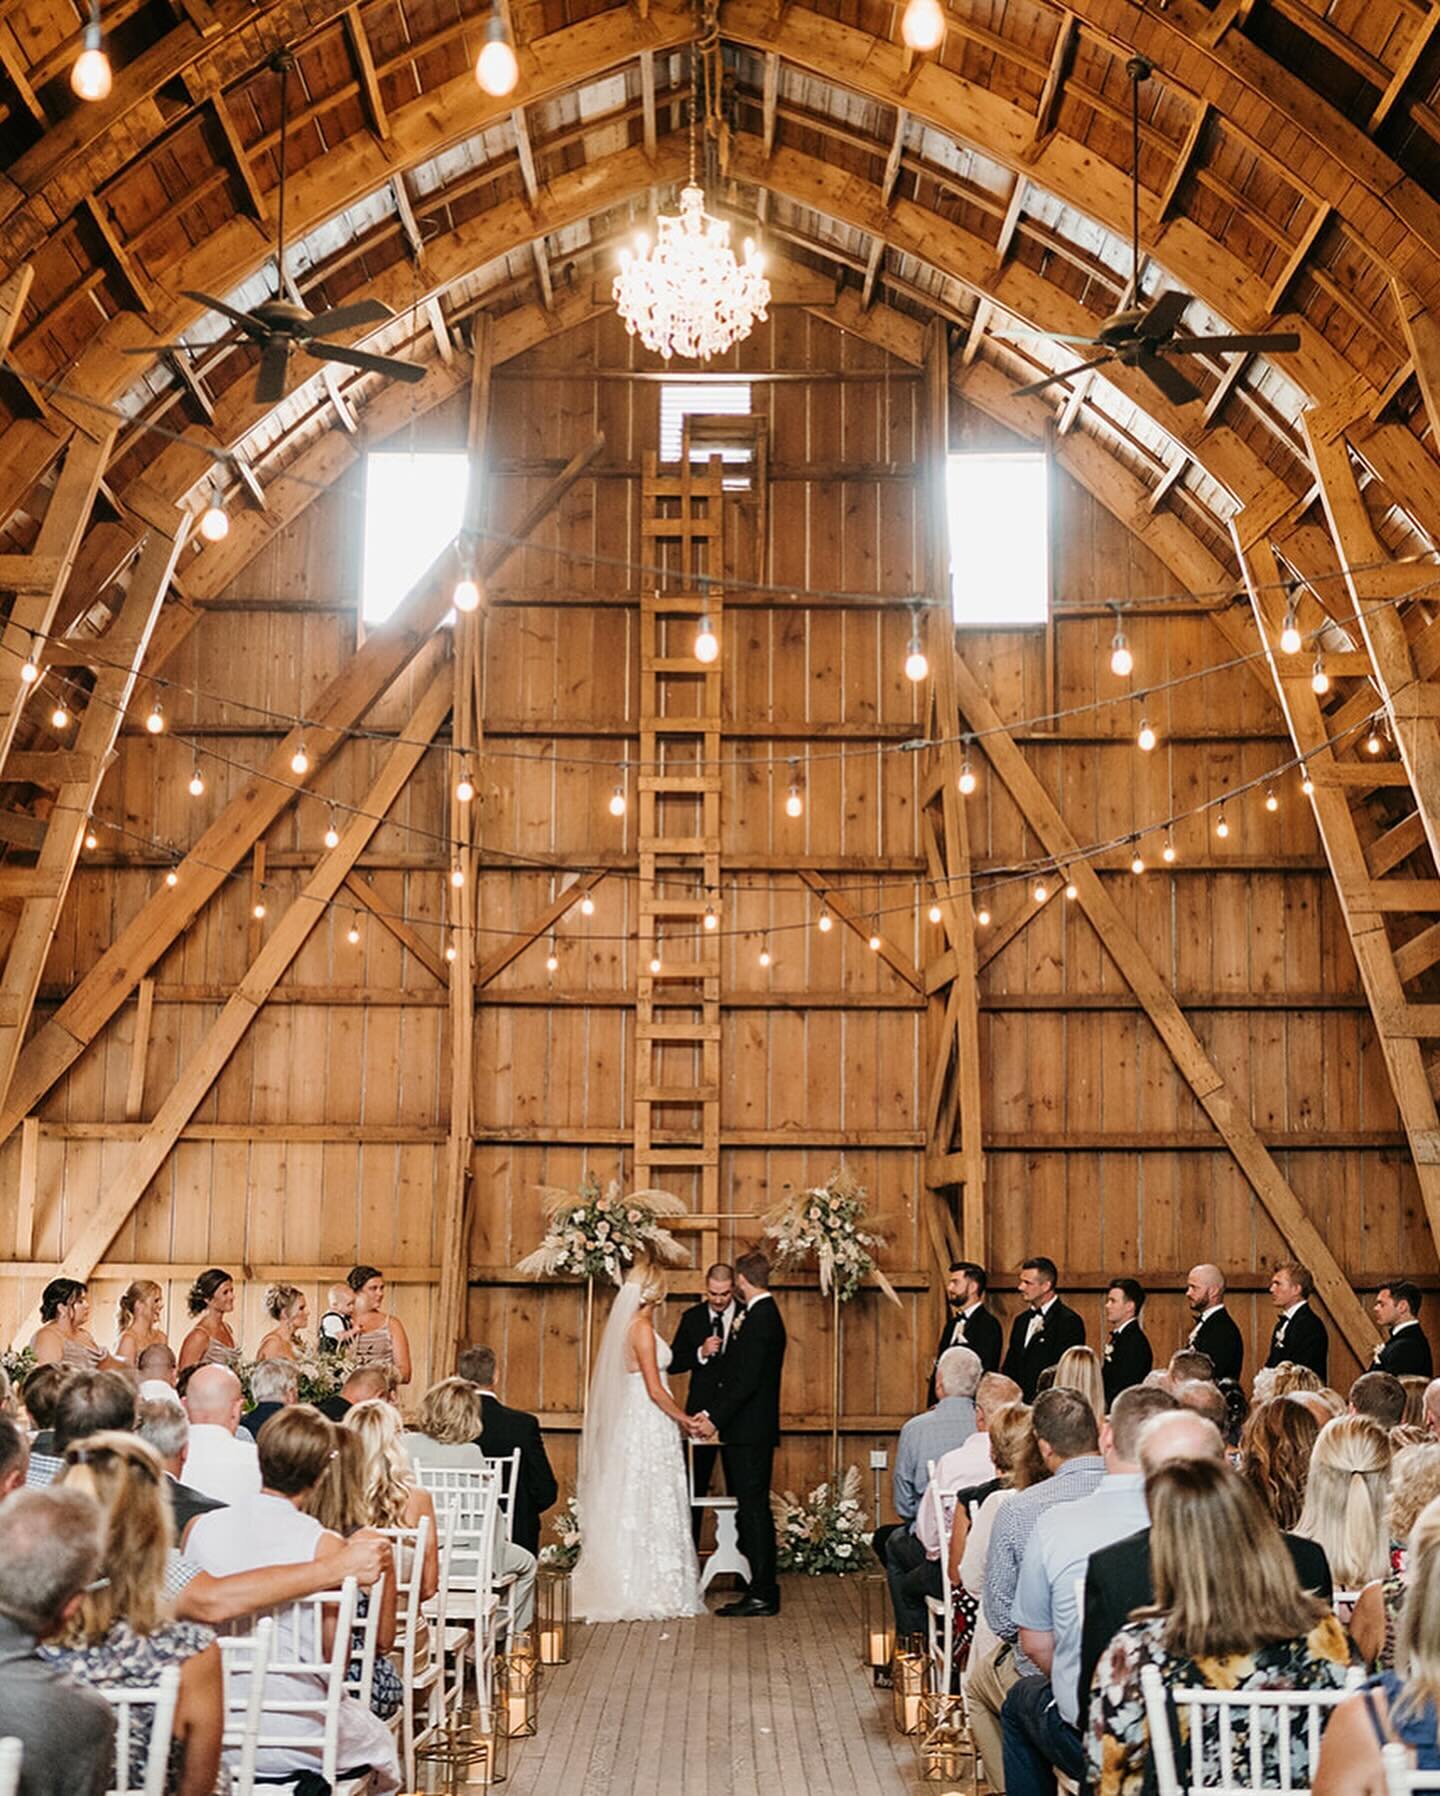 Hello, friends! We&rsquo;re The Cottage Farmhouse, a wedding venue just west of Minneapolis. 

Our farm offers beautiful, timeless spaces at an affordable price for up to 250 guests from May-October.

Our couple&rsquo;s stories are our favorite stori